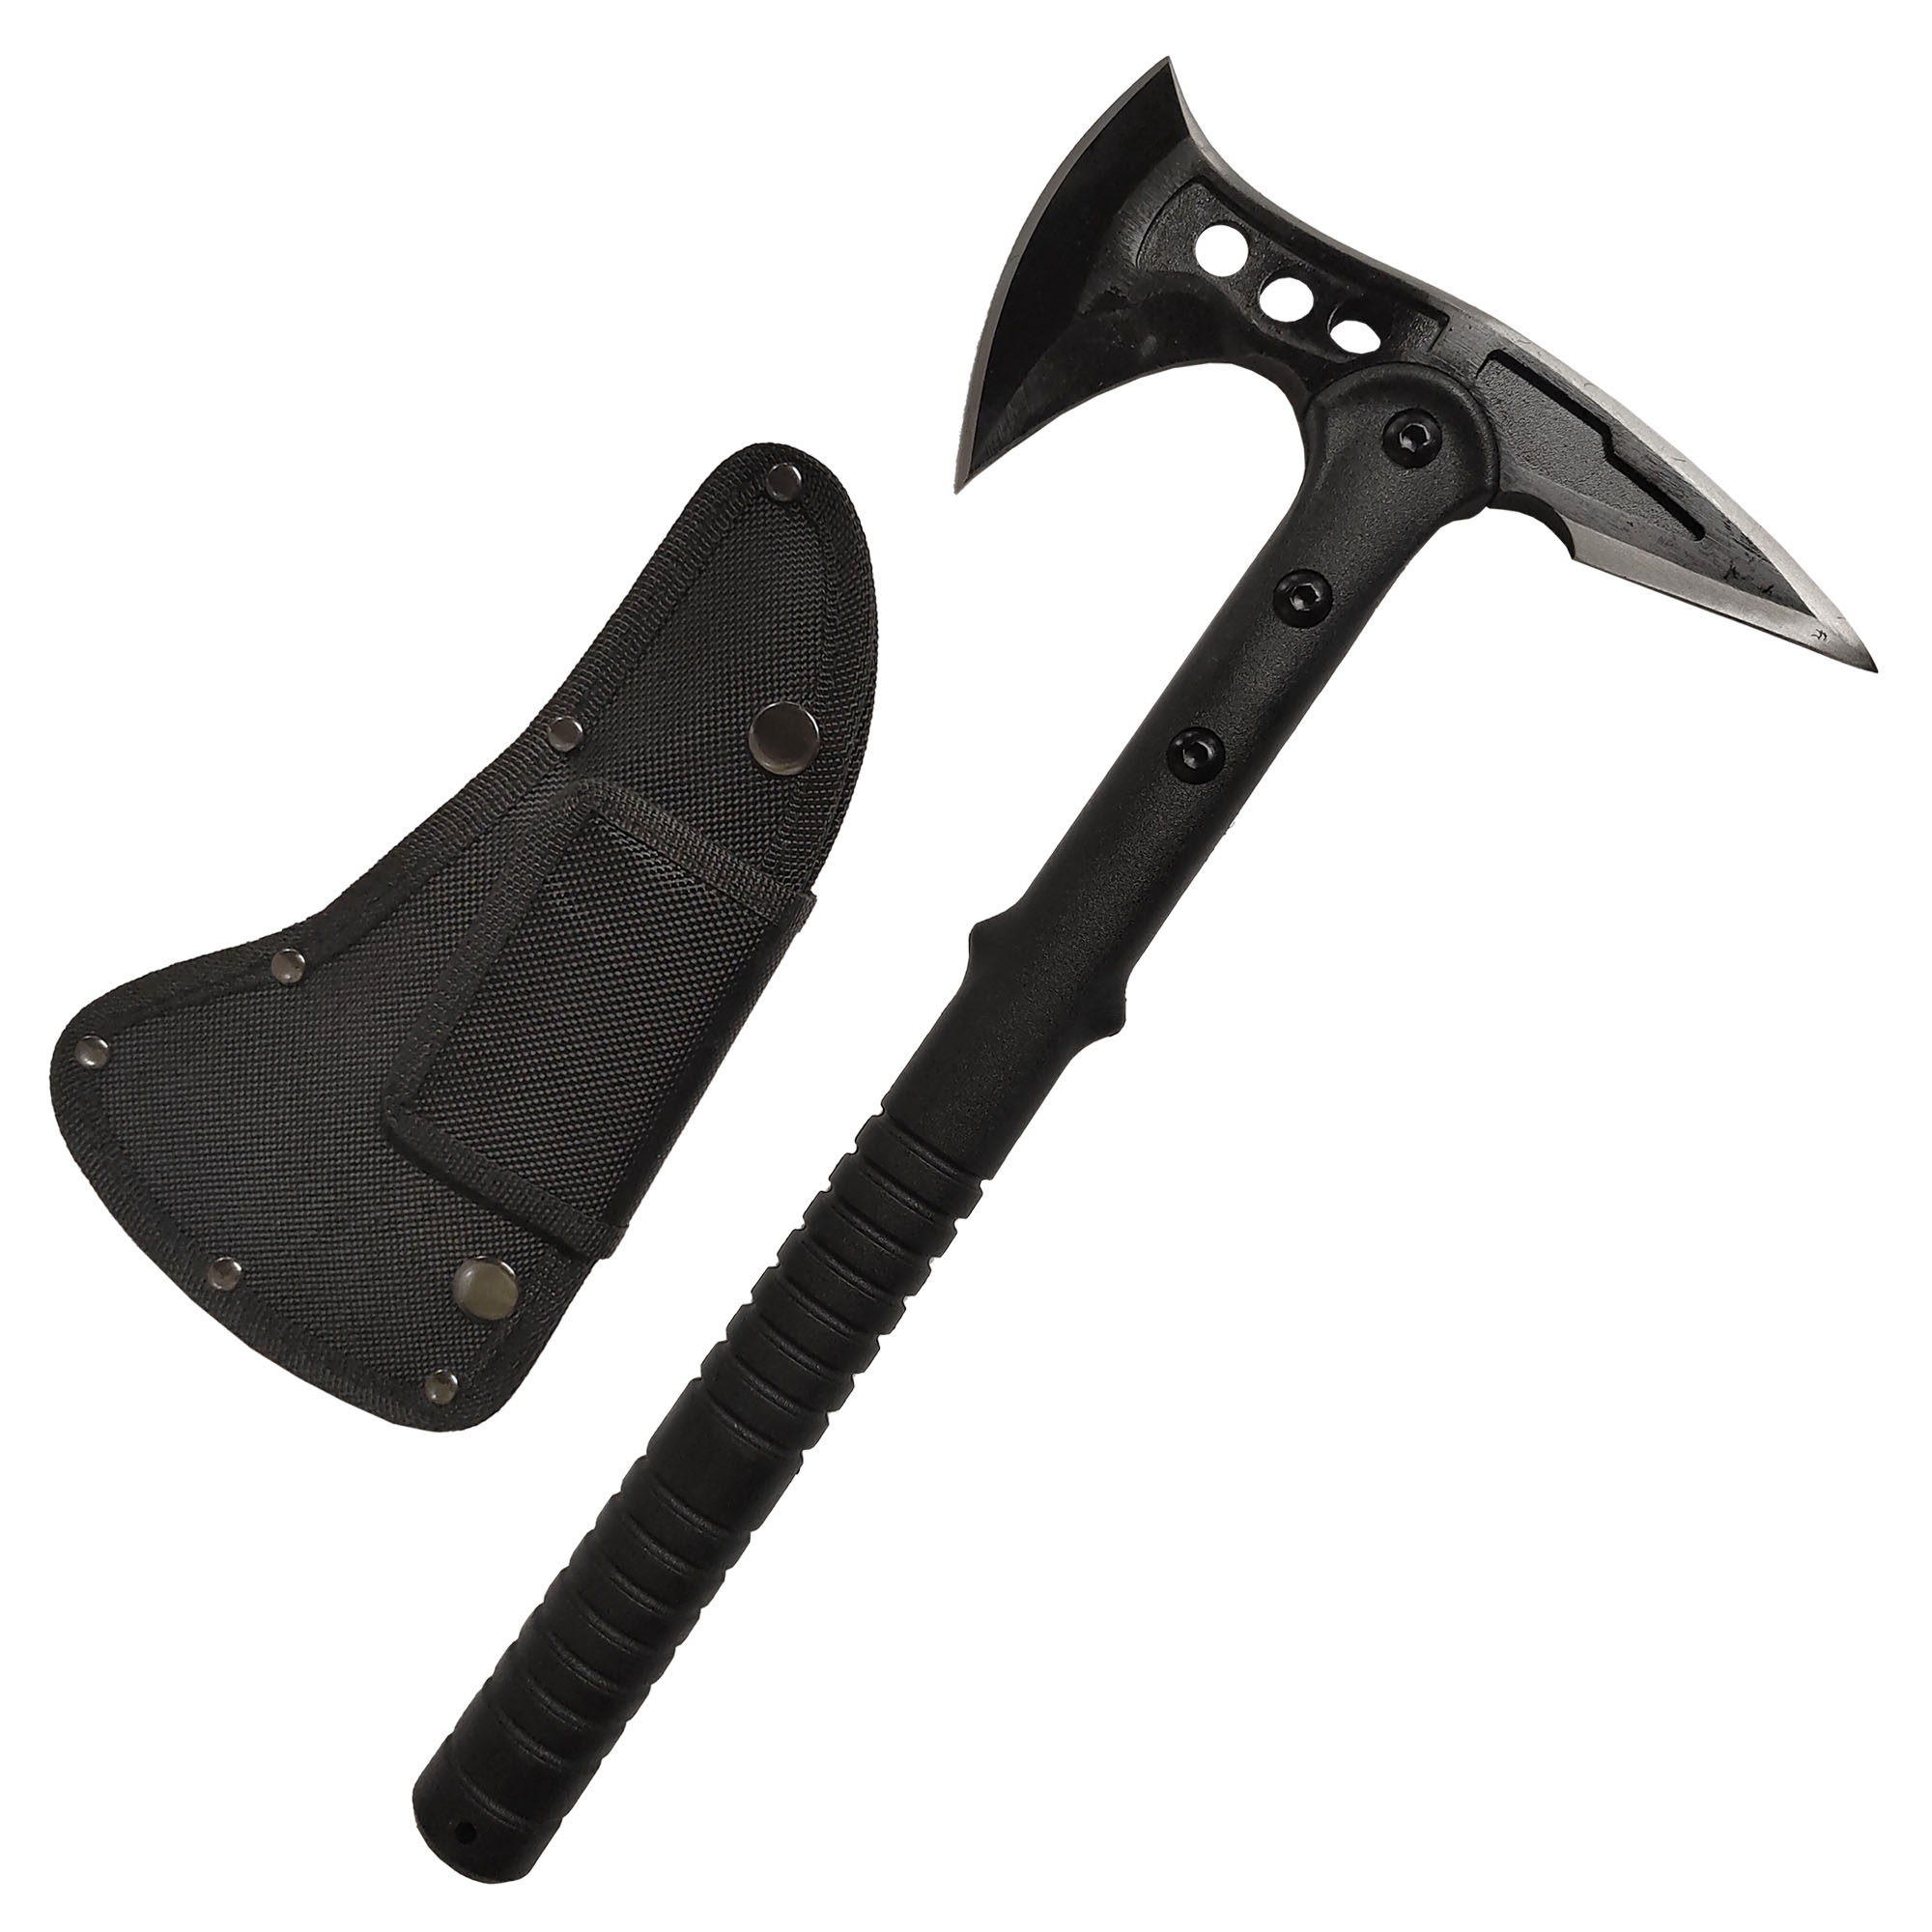 Outdoor axe with spiked head and scabbard